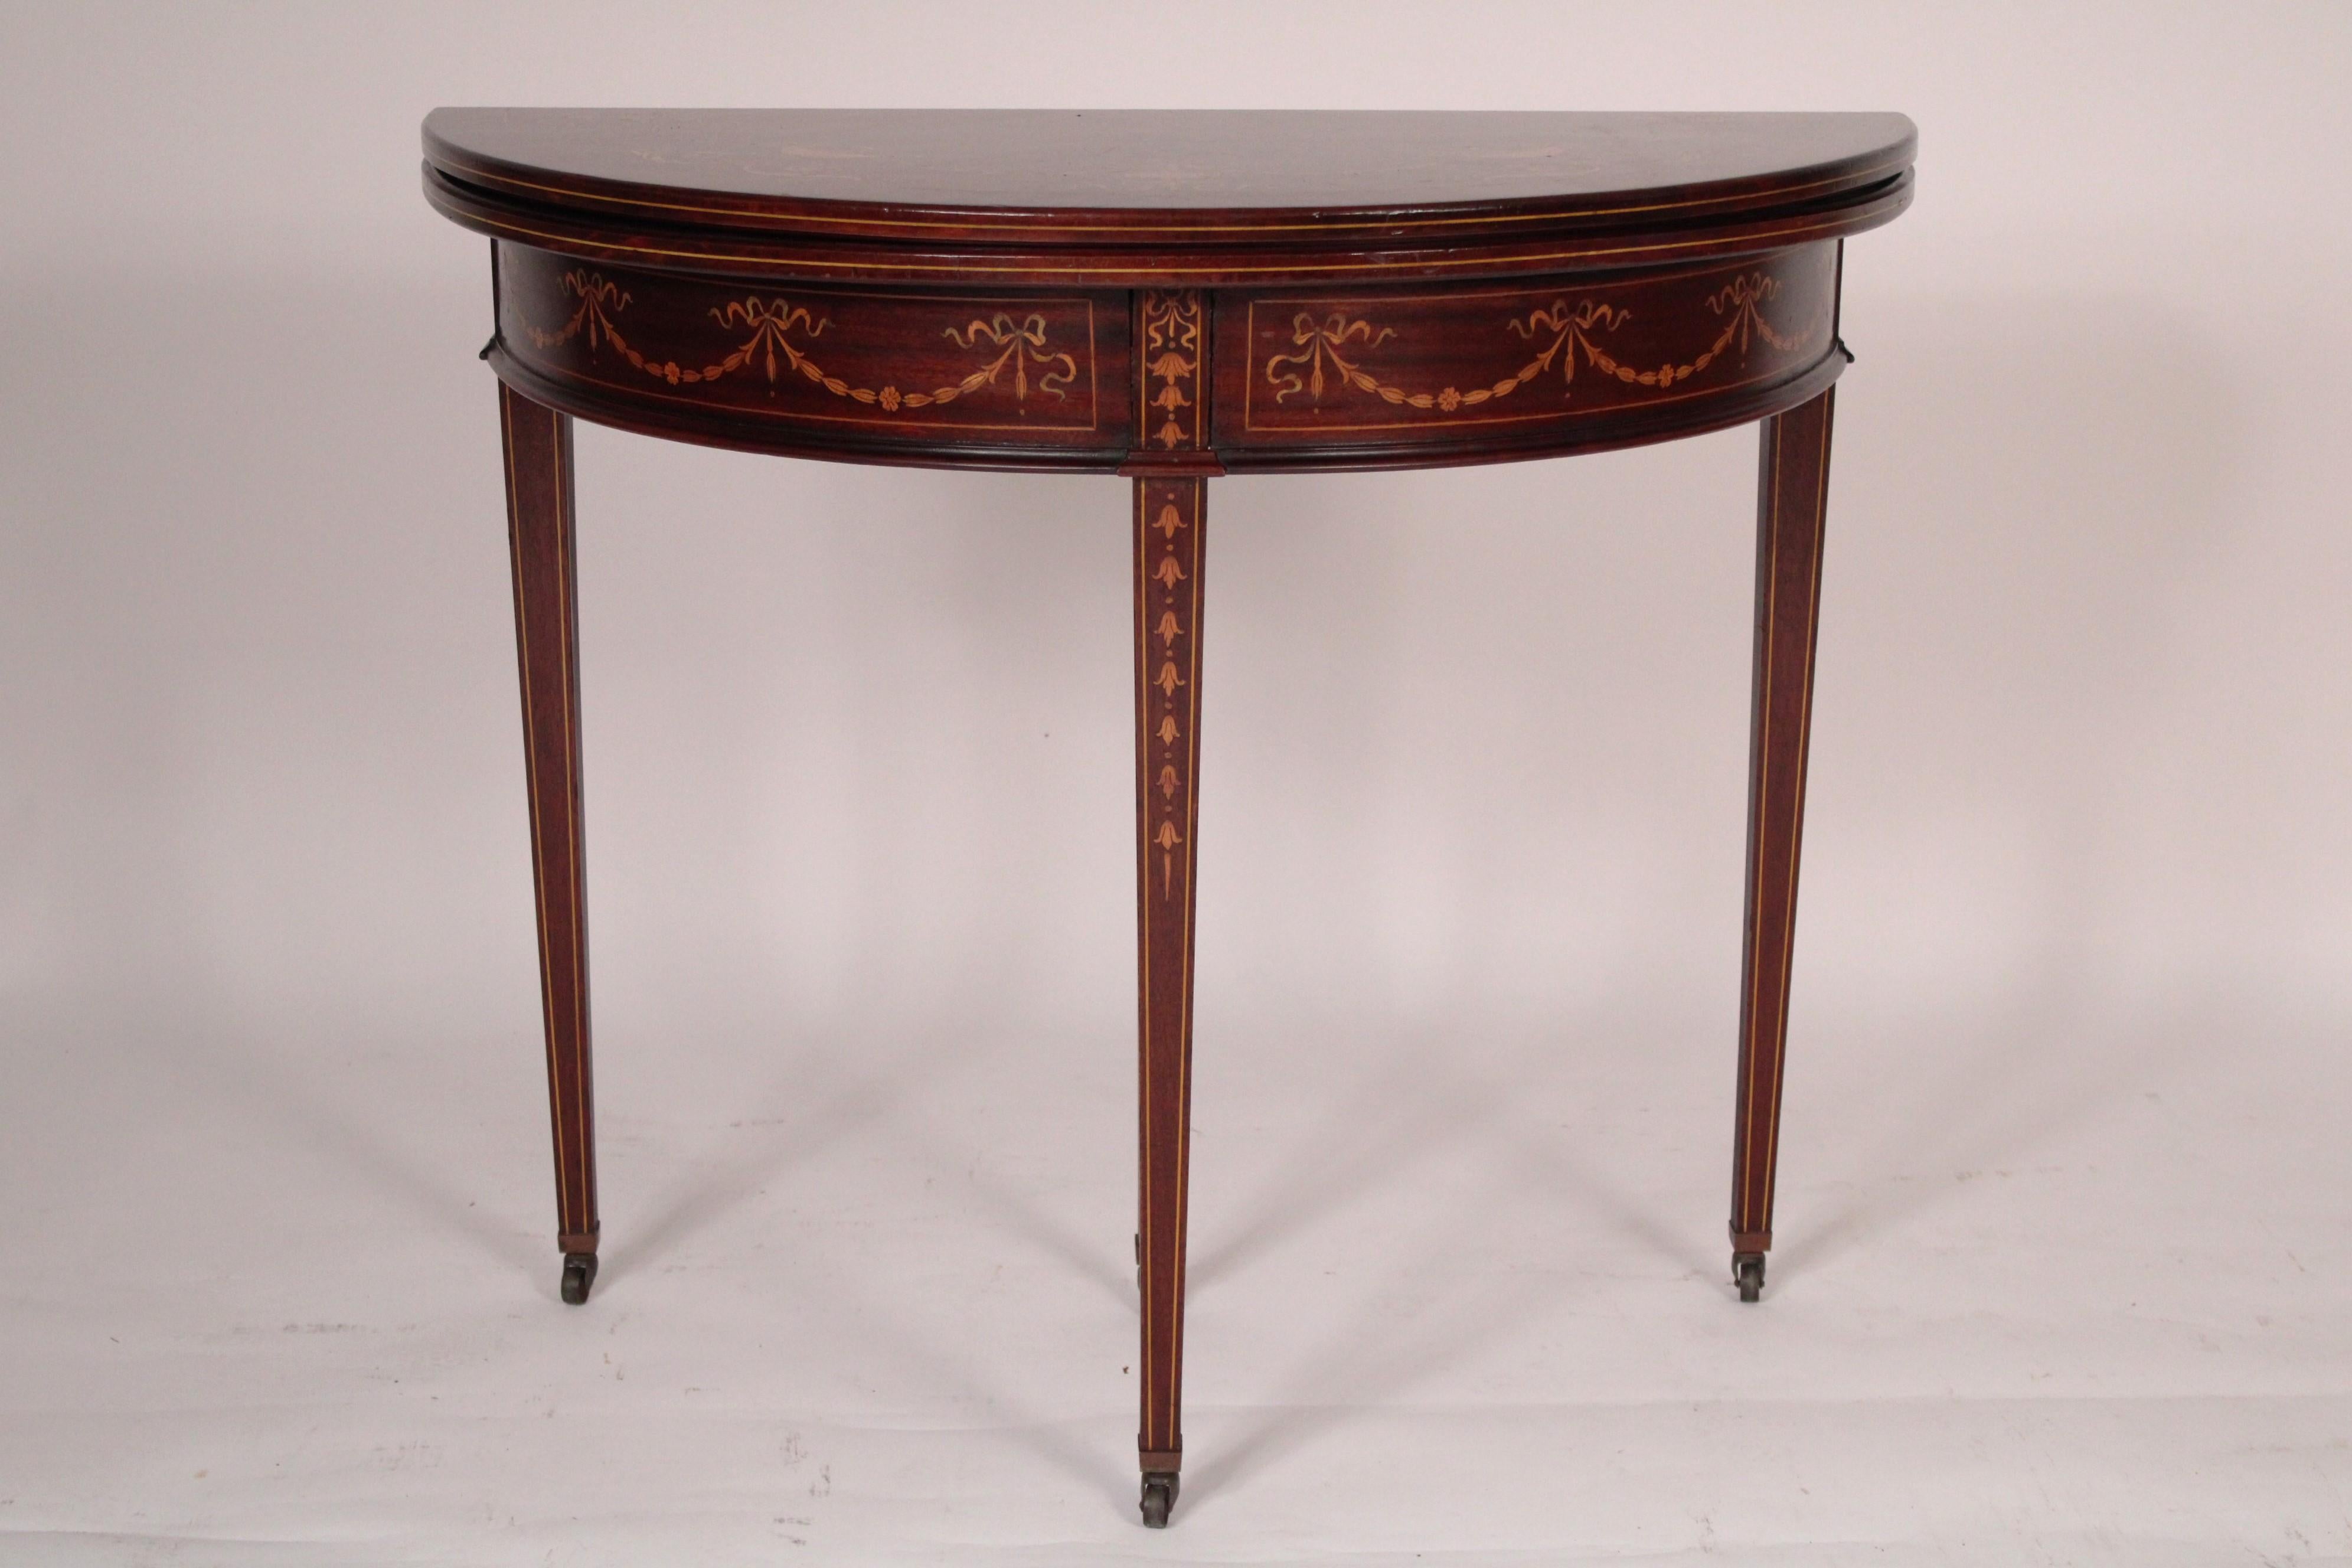 English Edwardian mahogany inlaid demi lune games table, circa 1920.
With a demi lune shaped top with swag and urn inlay, a frieze with swag and ribbon inlay the square tapered legs inlaid with bellflowers and string inlay, resting on brass casters.